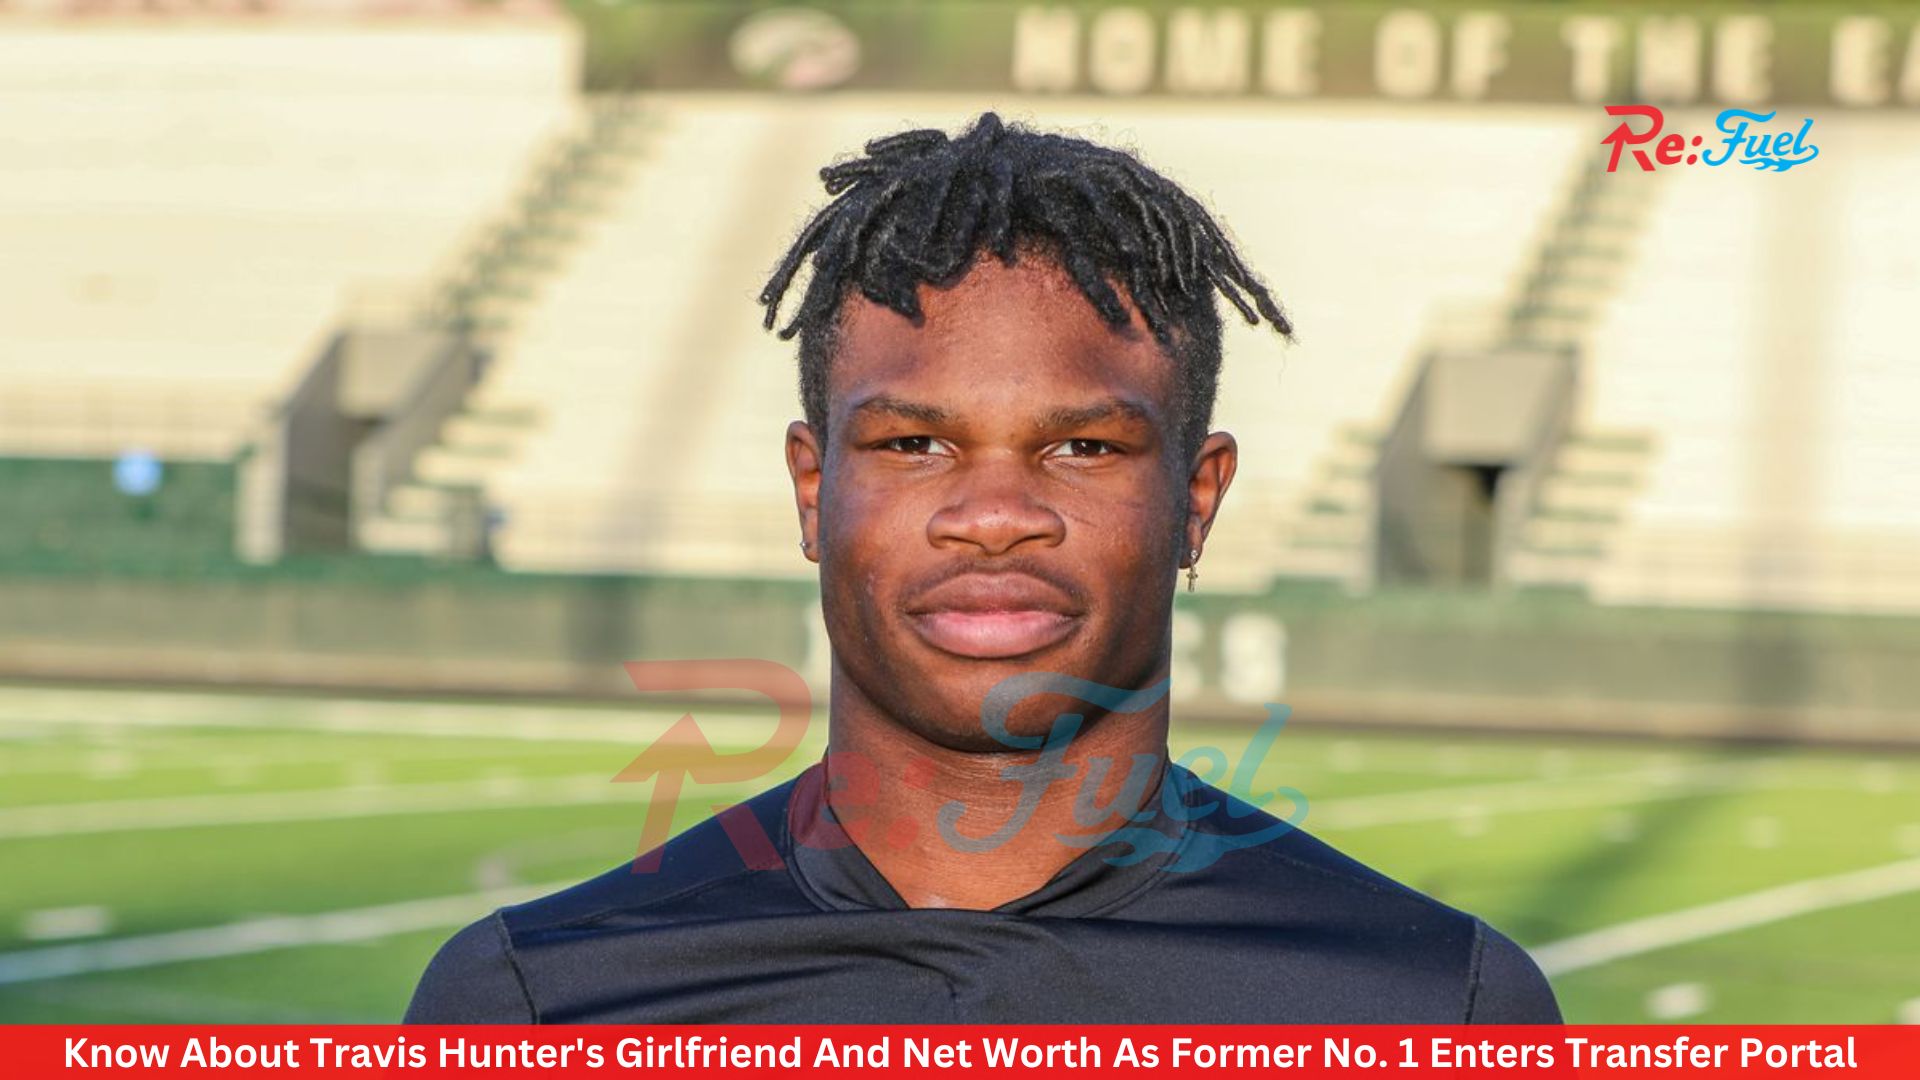 Know About Travis Hunter's Girlfriend And Net Worth As Former No. 1 Enters Transfer Portal